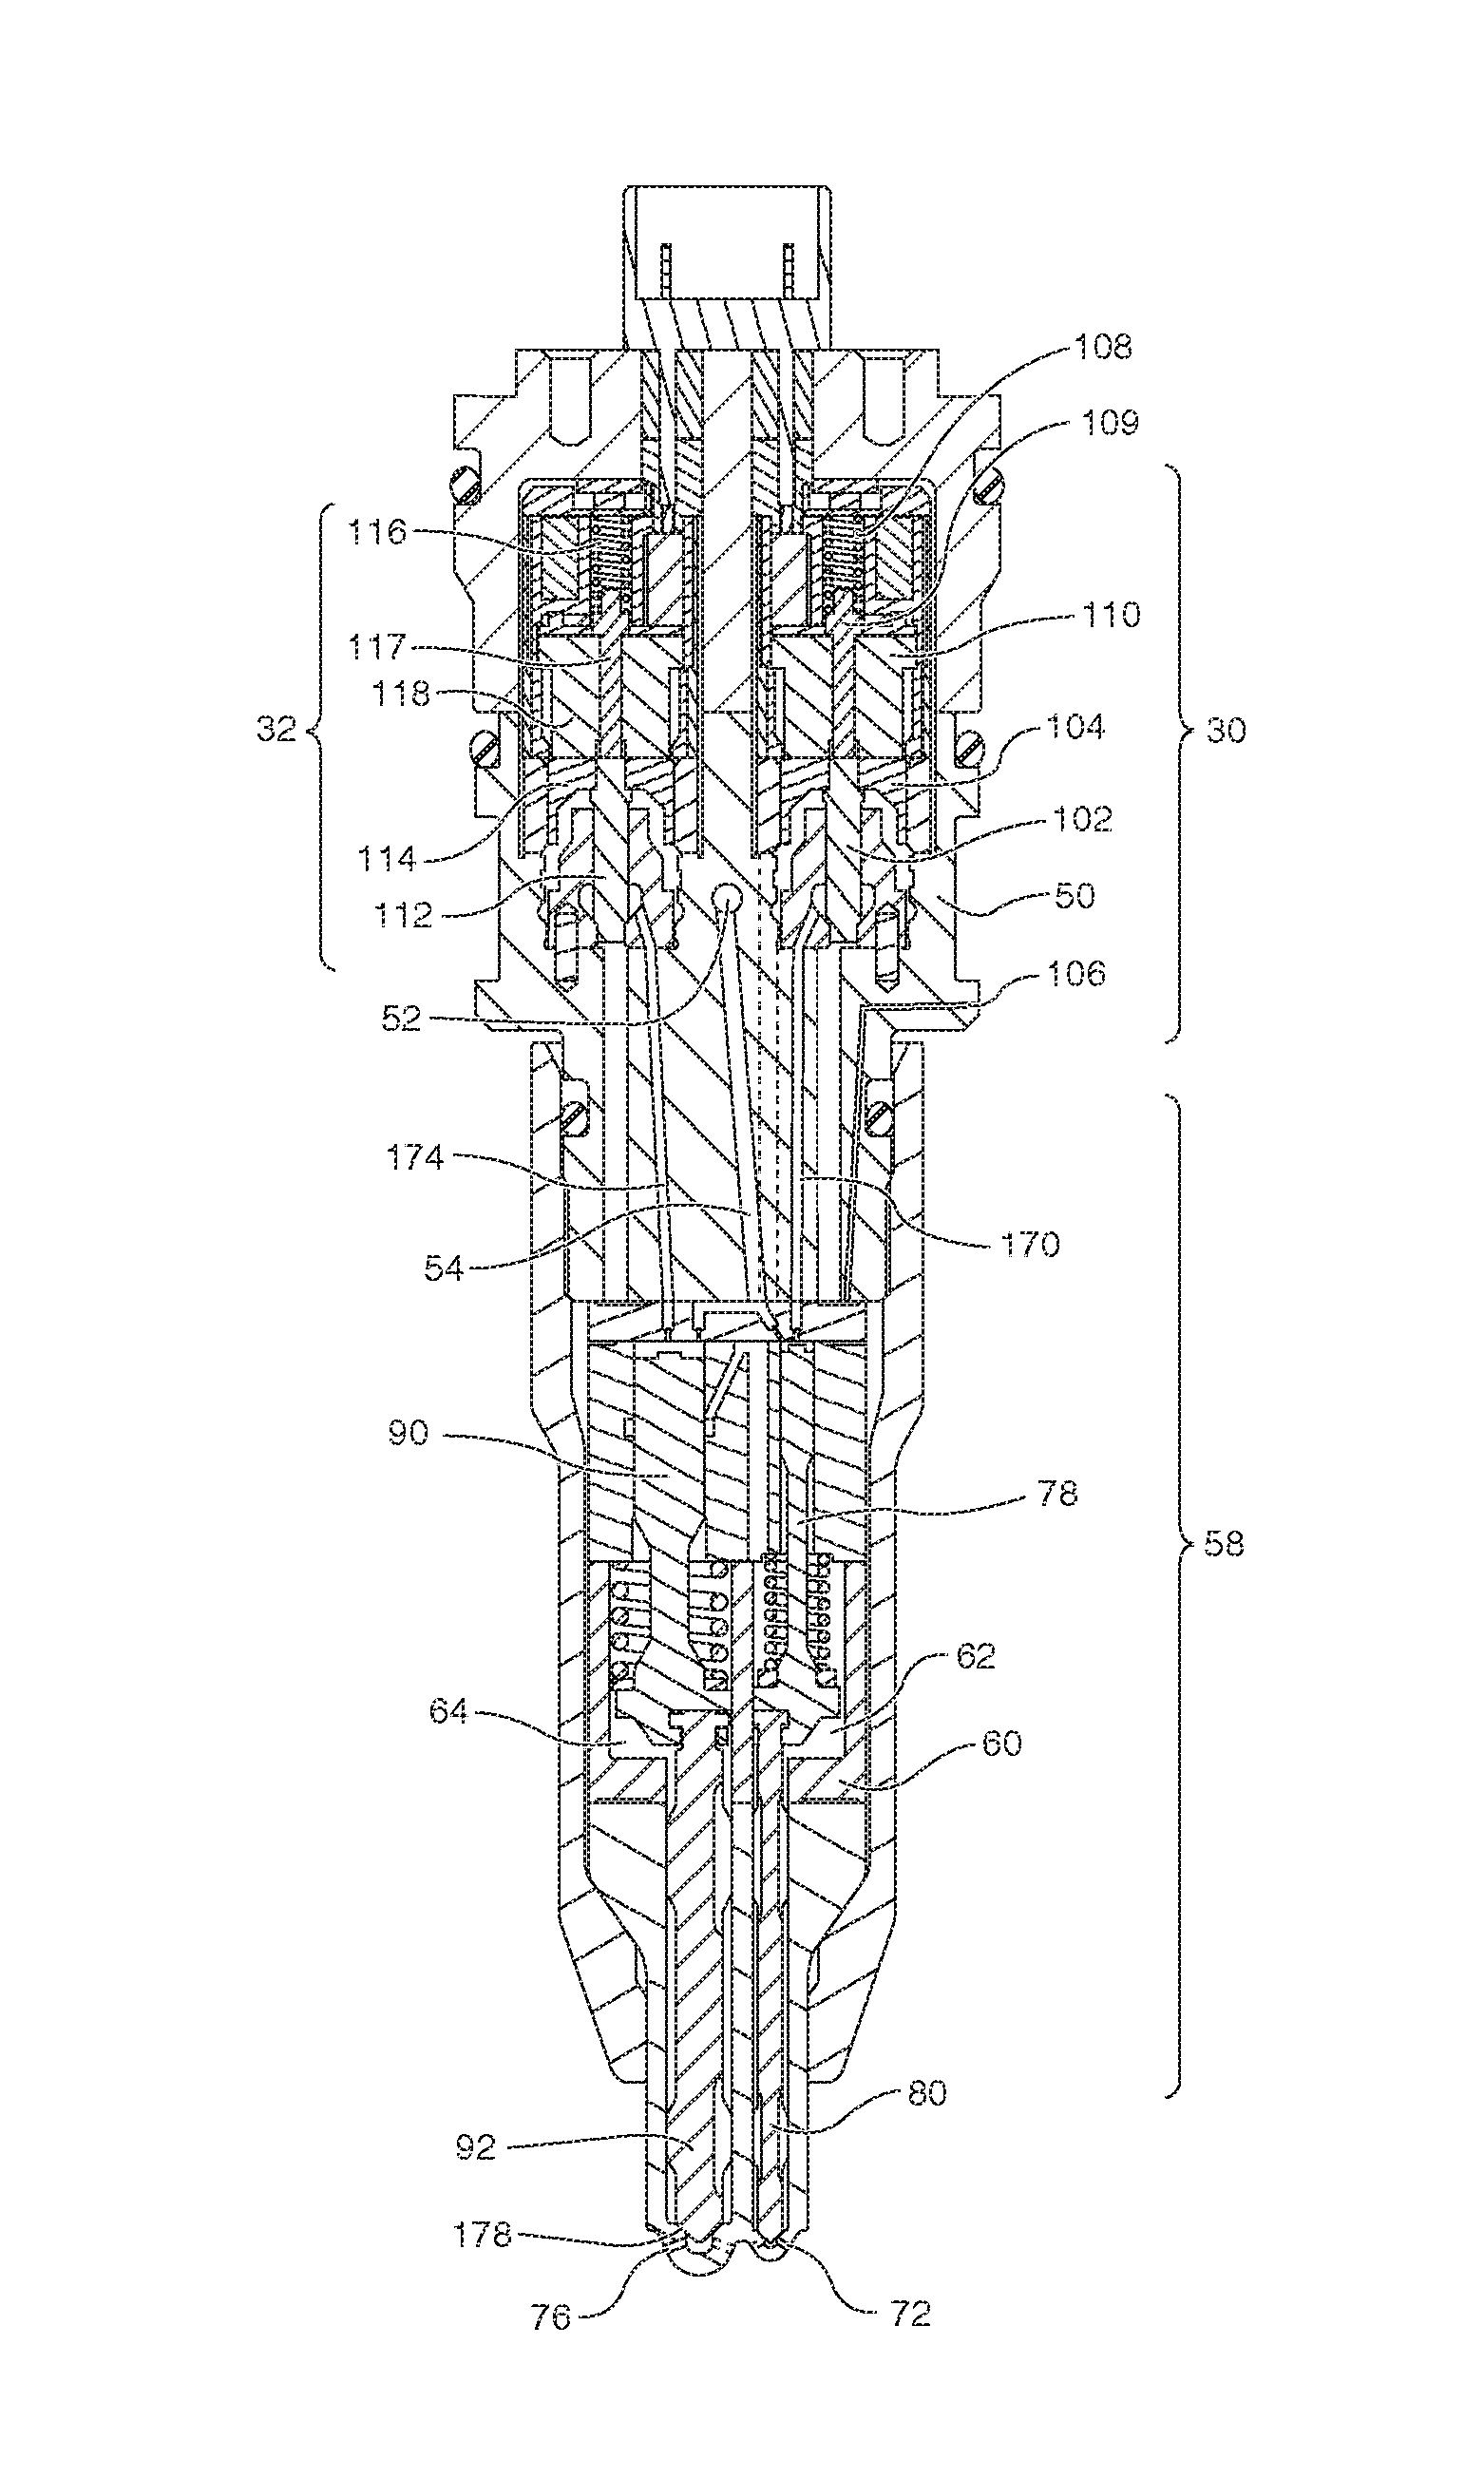 Dual fuel injector for a common rail system